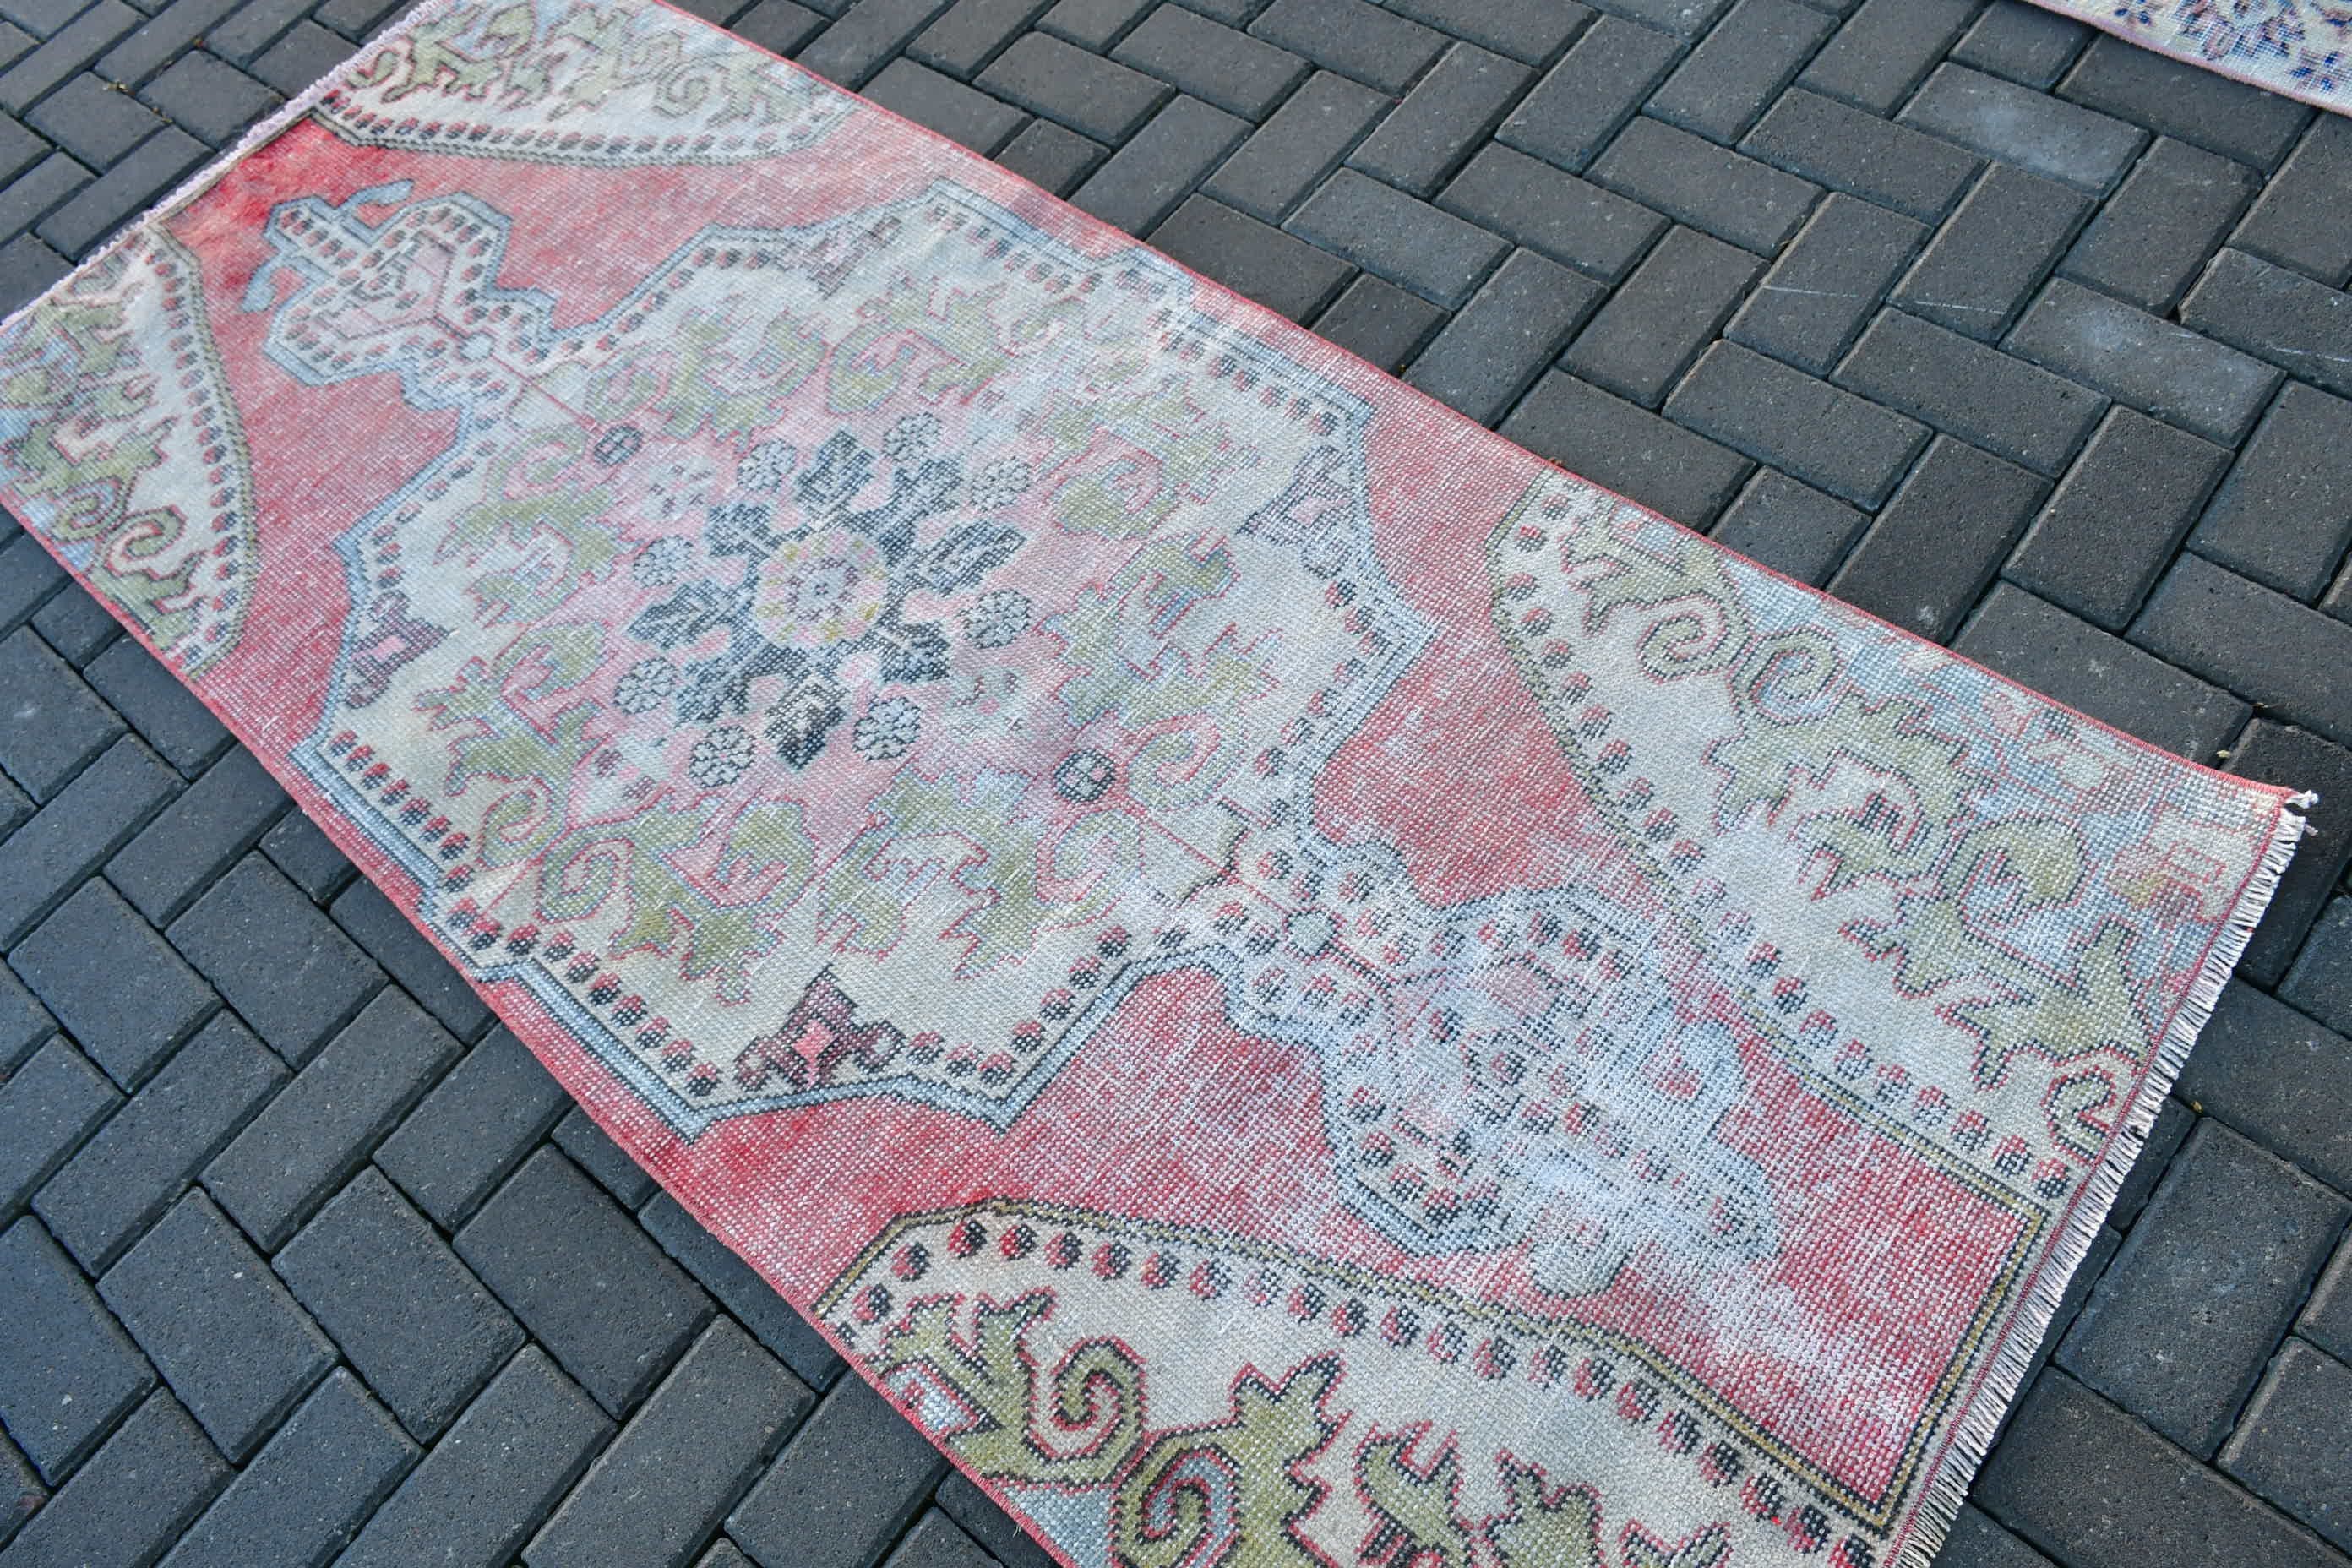 Home Decor Rug, Old Rug, Red  2.9x6.8 ft Accent Rugs, Rugs for Entry, Bedroom Rugs, Kitchen Rug, Turkish Rug, Vintage Rug